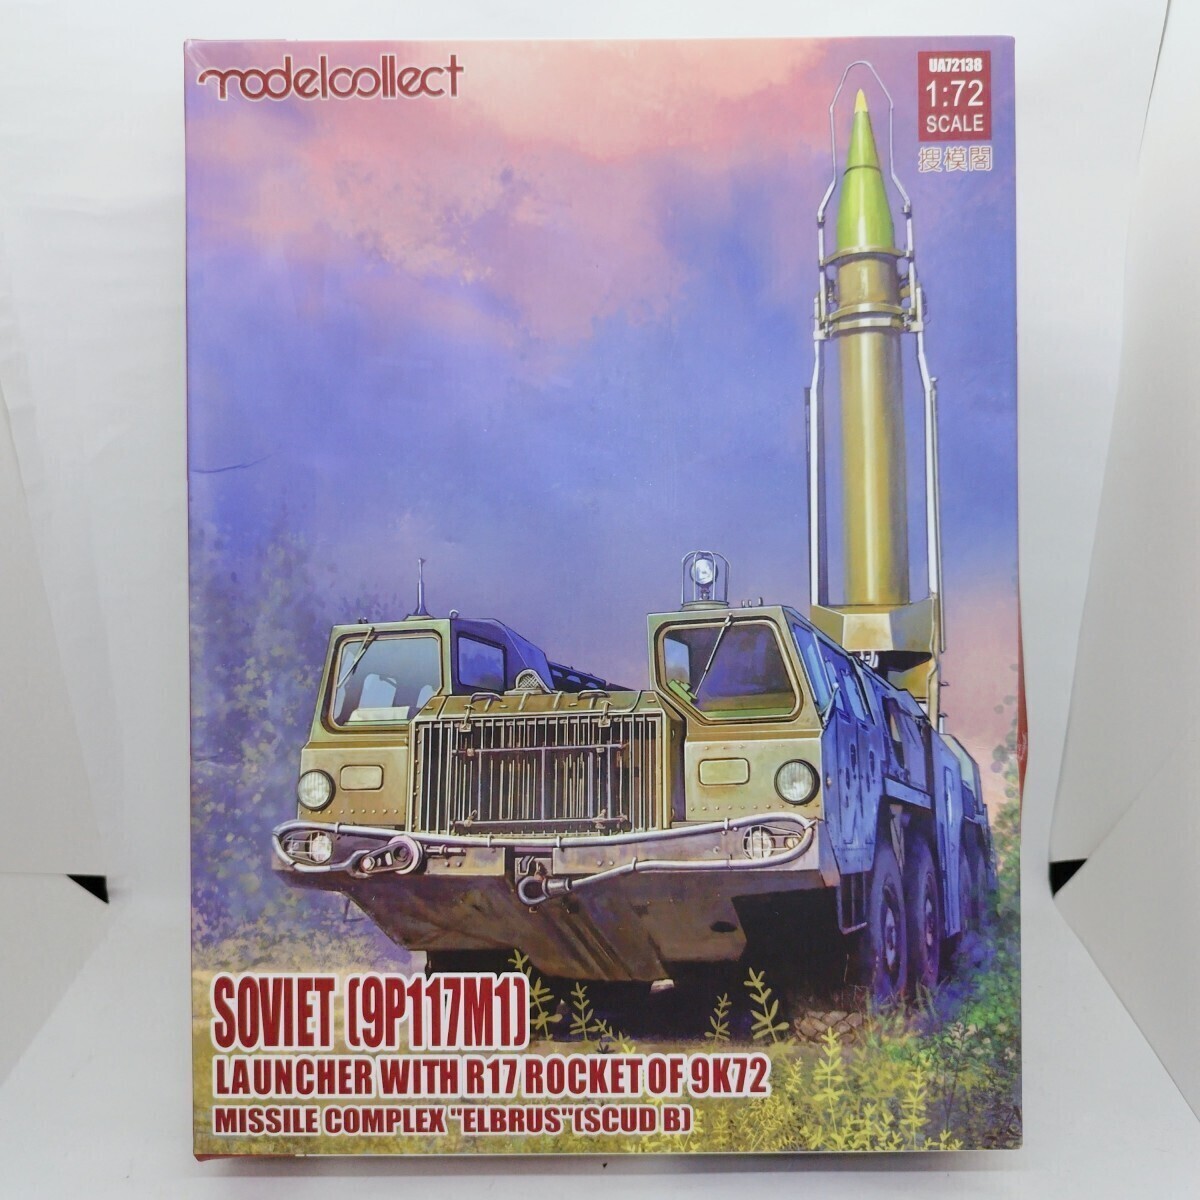 [ Junk ]ModelCollect 1/72 SOVIET 9P117M1 LAUNCHER WITH R17 ROCKET OF 9K72 MISSILE COMPLEX ELBRUS SCUD B